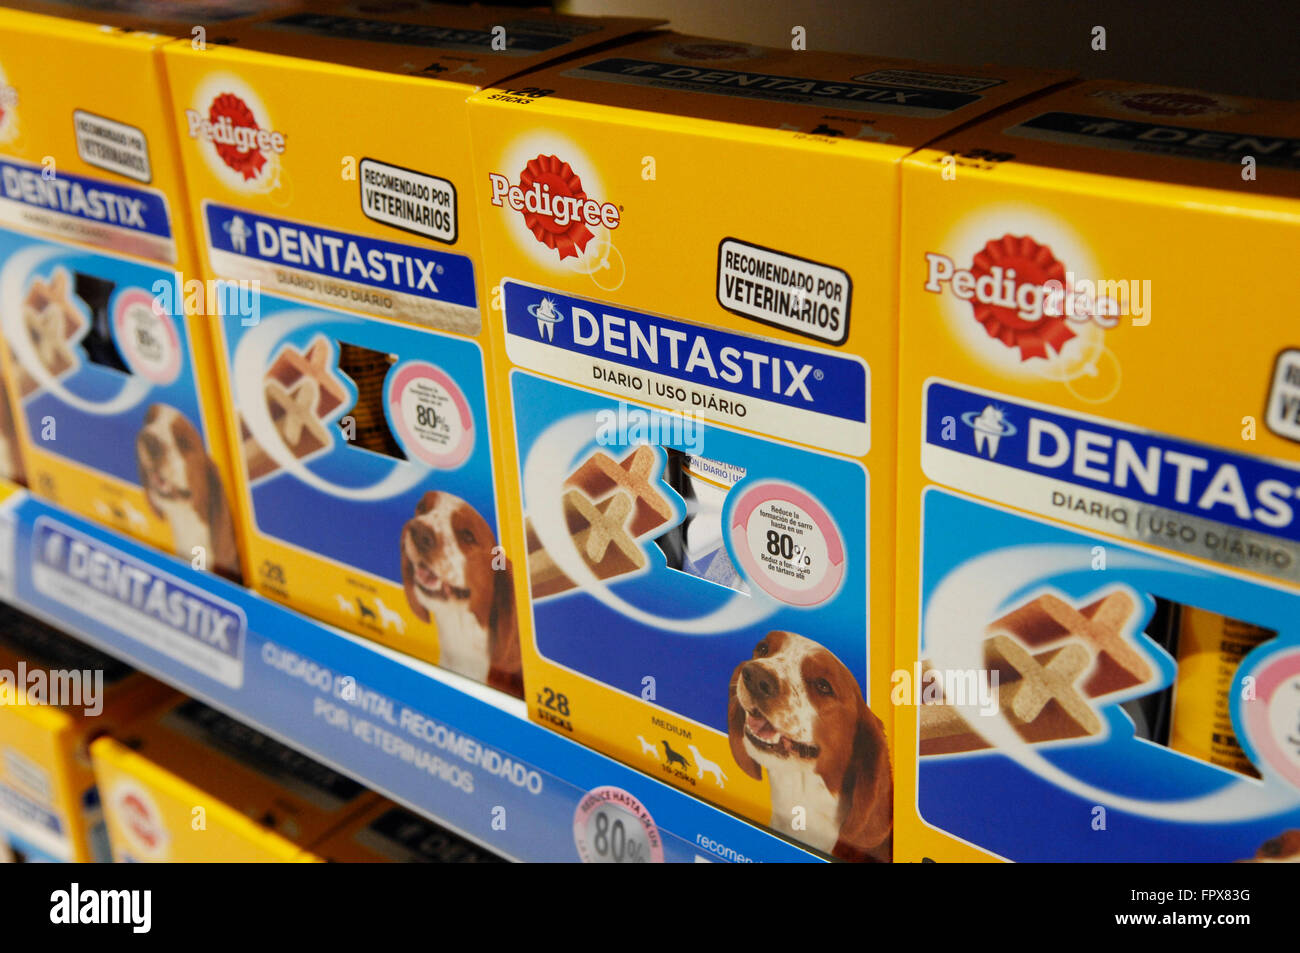 Pedigree Dentastix for dogs on display at a Carrefour Supermarket in Malaga Spain. Stock Photo